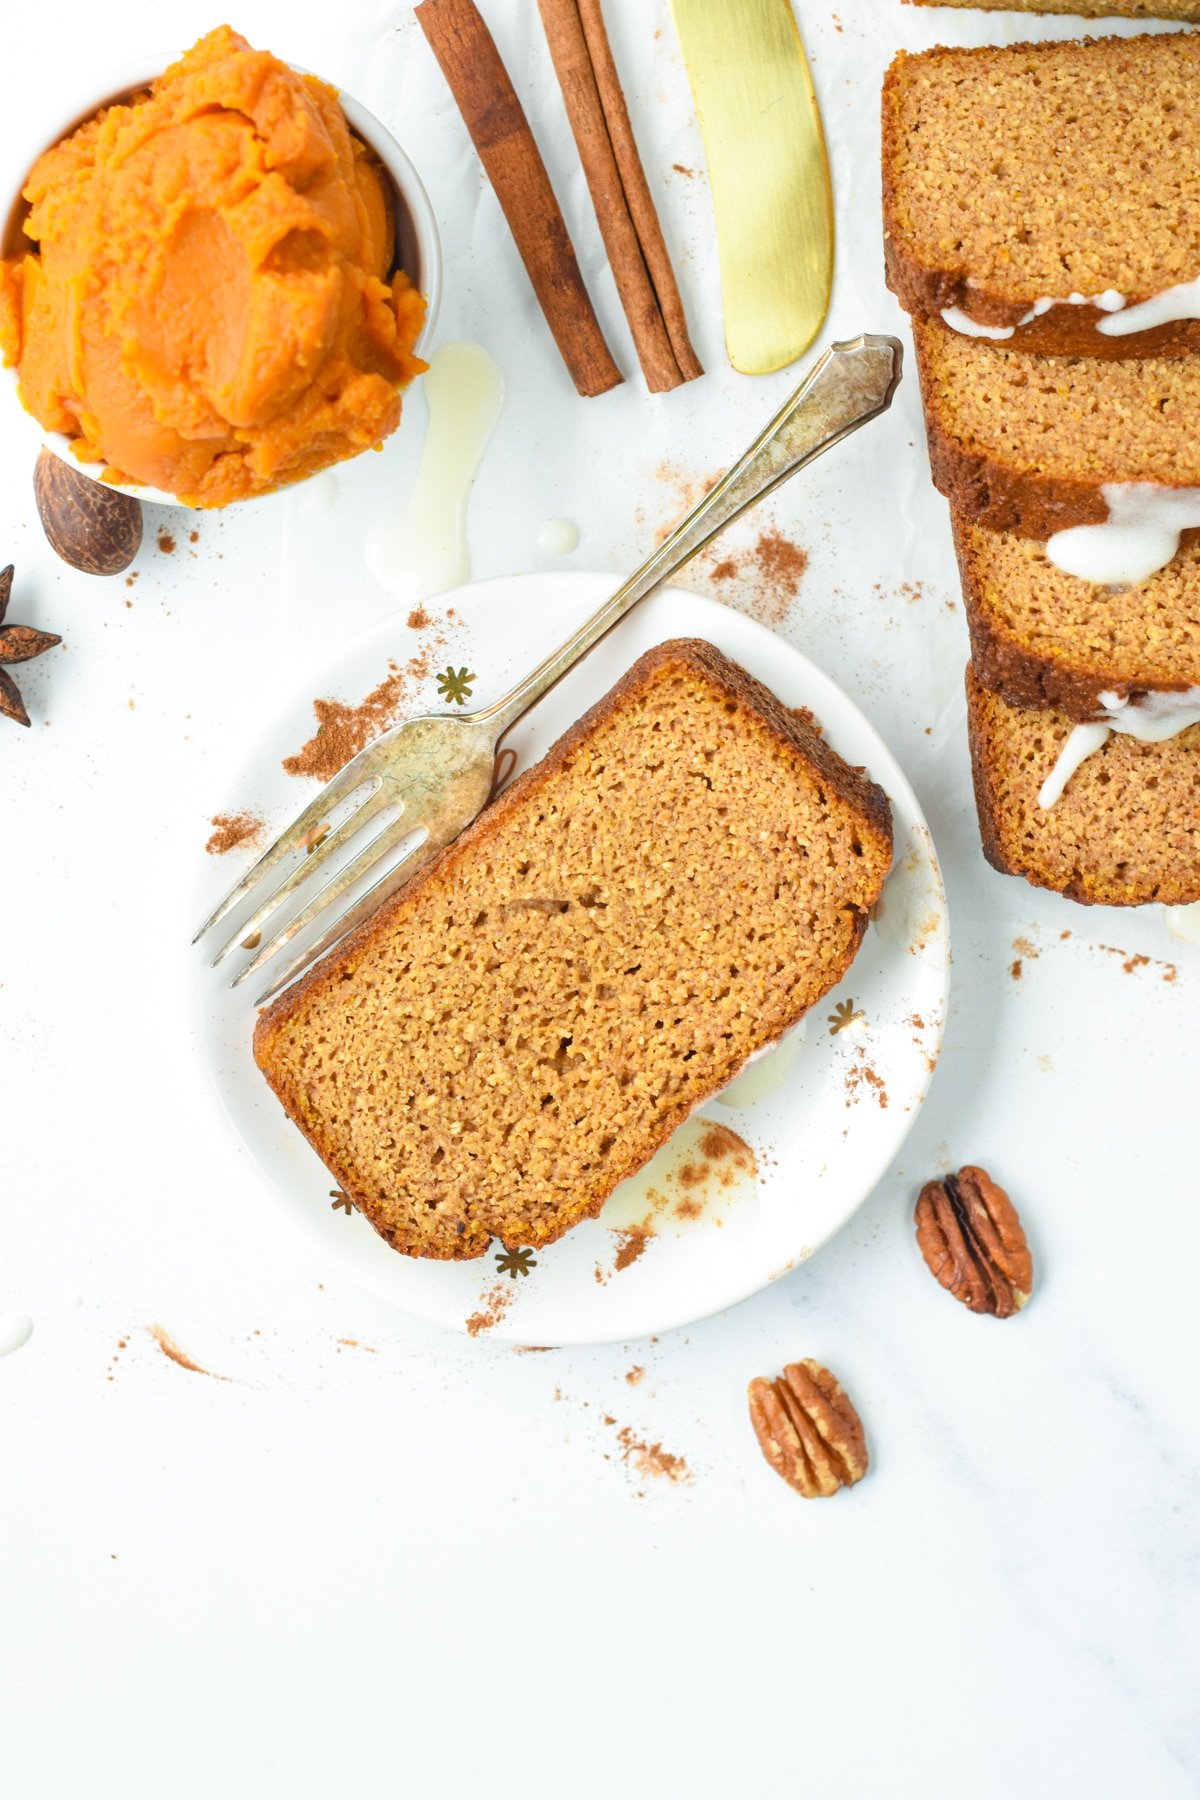 A slice of Pumpkin Bread with Almond Flour on a small white plate next to several other slices, cinnamon sticks, and pumpkin puree.,